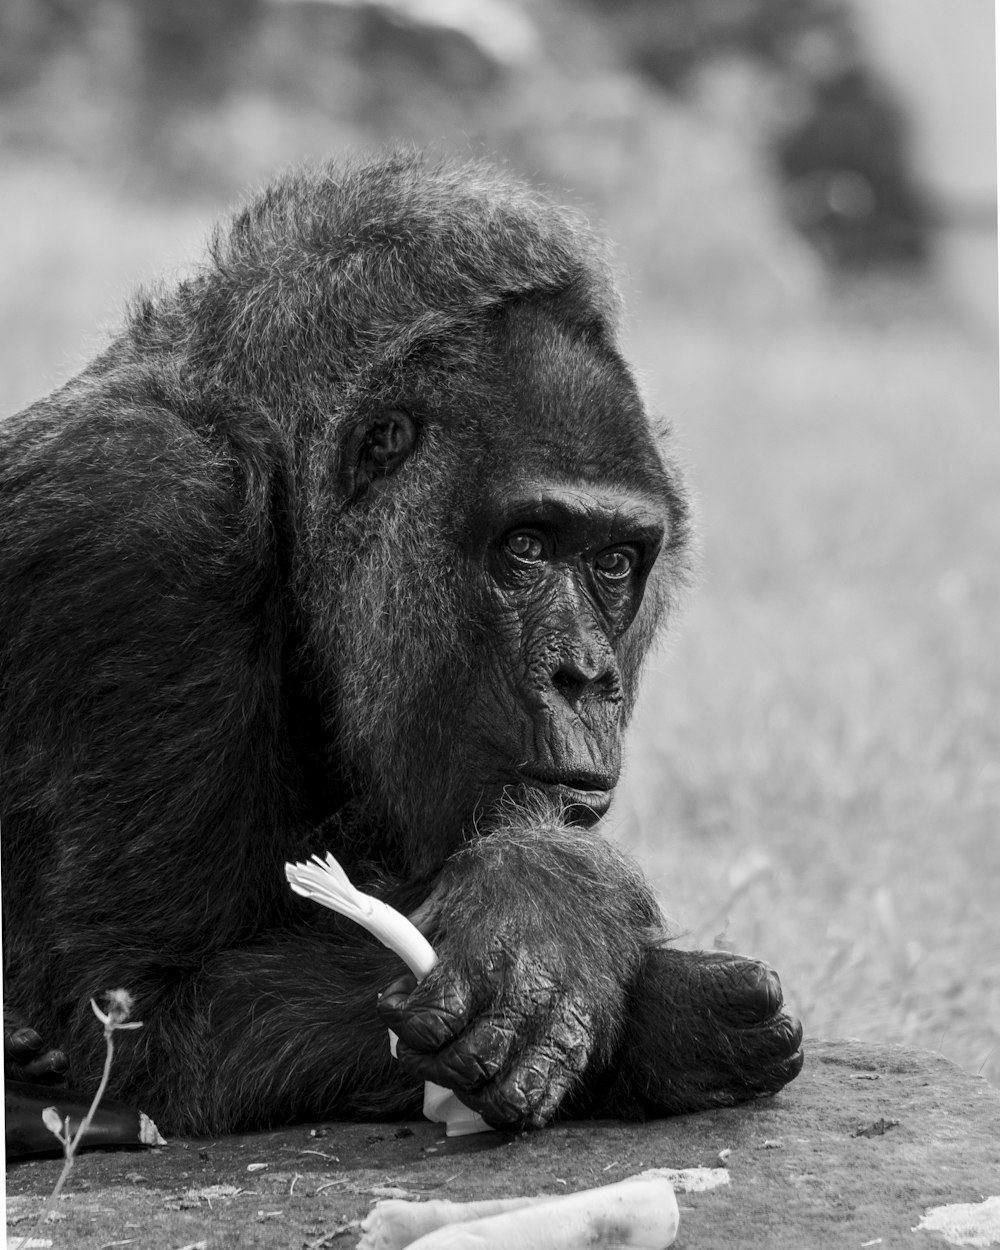 a black and white photo of a monkey holding a toothbrush